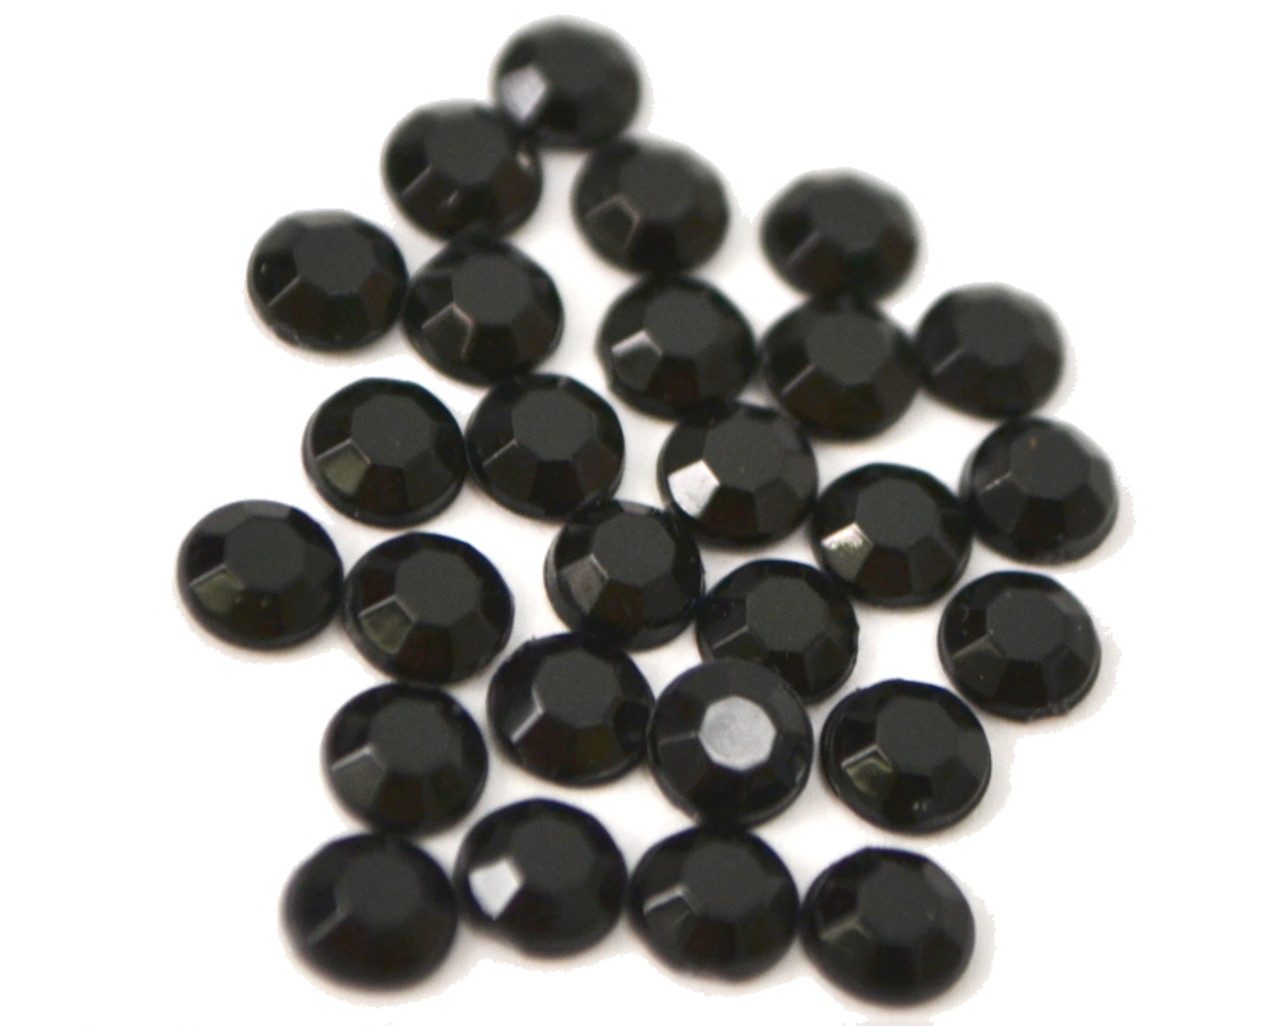 Black 4mm SS16 Wholesale Flat Back Acrylic Rhinestones - Pack of 1,000  Pieces - CB Flowers & Crafts